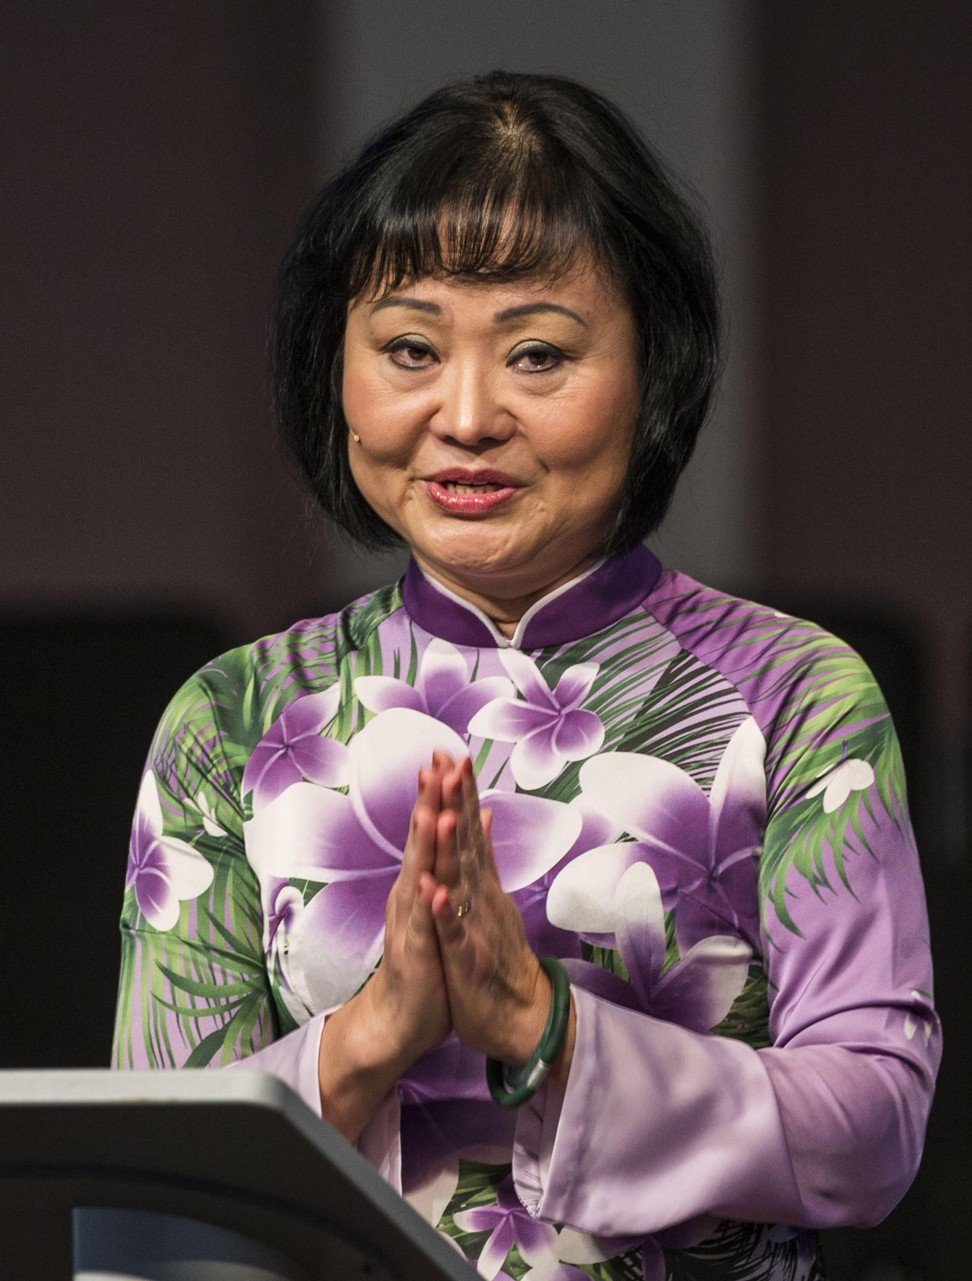 Kim Phuc Phan Thi has been haunted by her wartime trauma, but has used religion to help ease the pain. Photo: Alamy